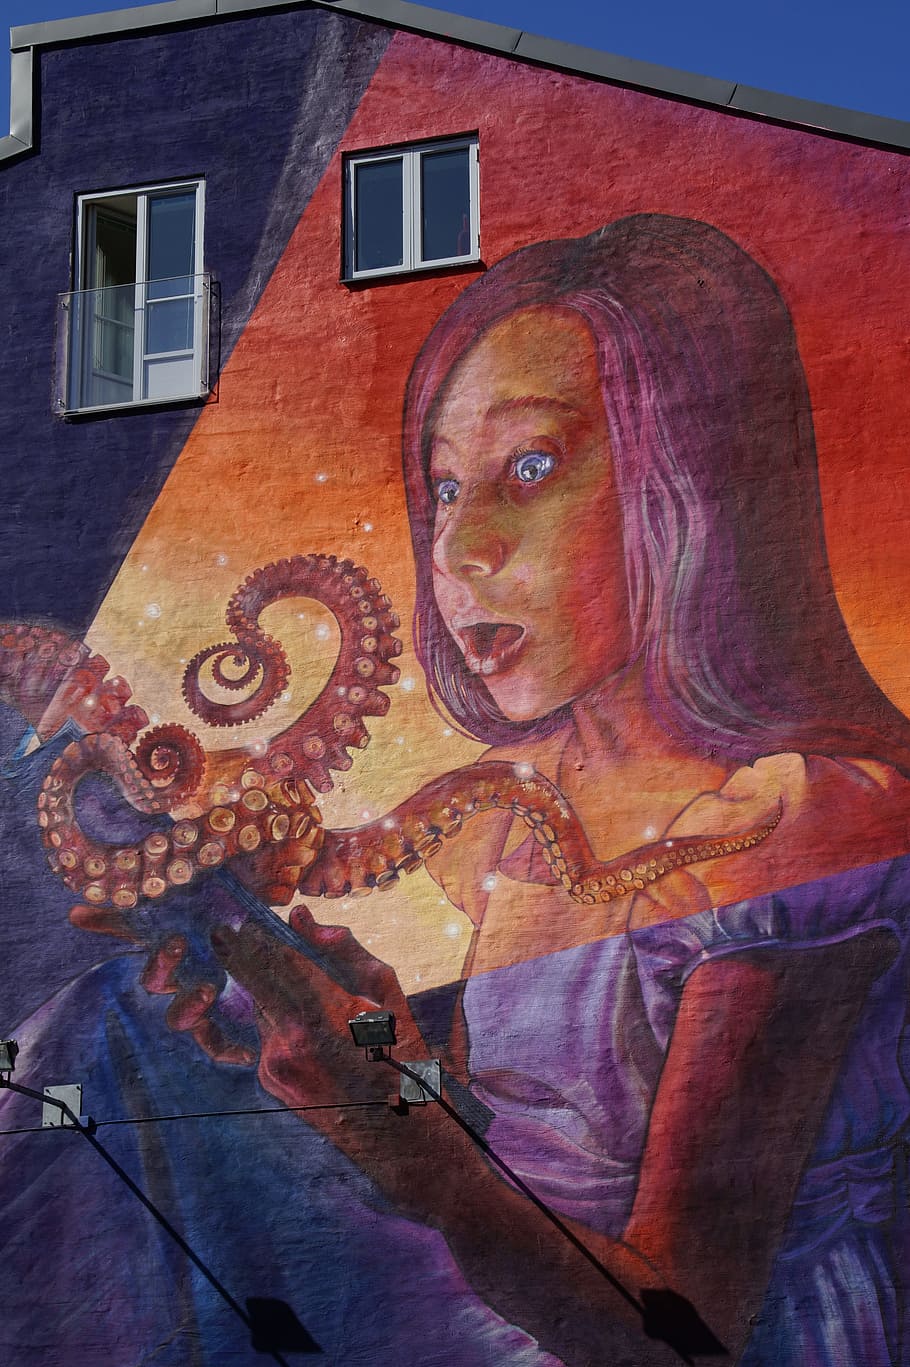 woman, octopus painting, home, house facade, painted, painting, artfully, art, building, facade